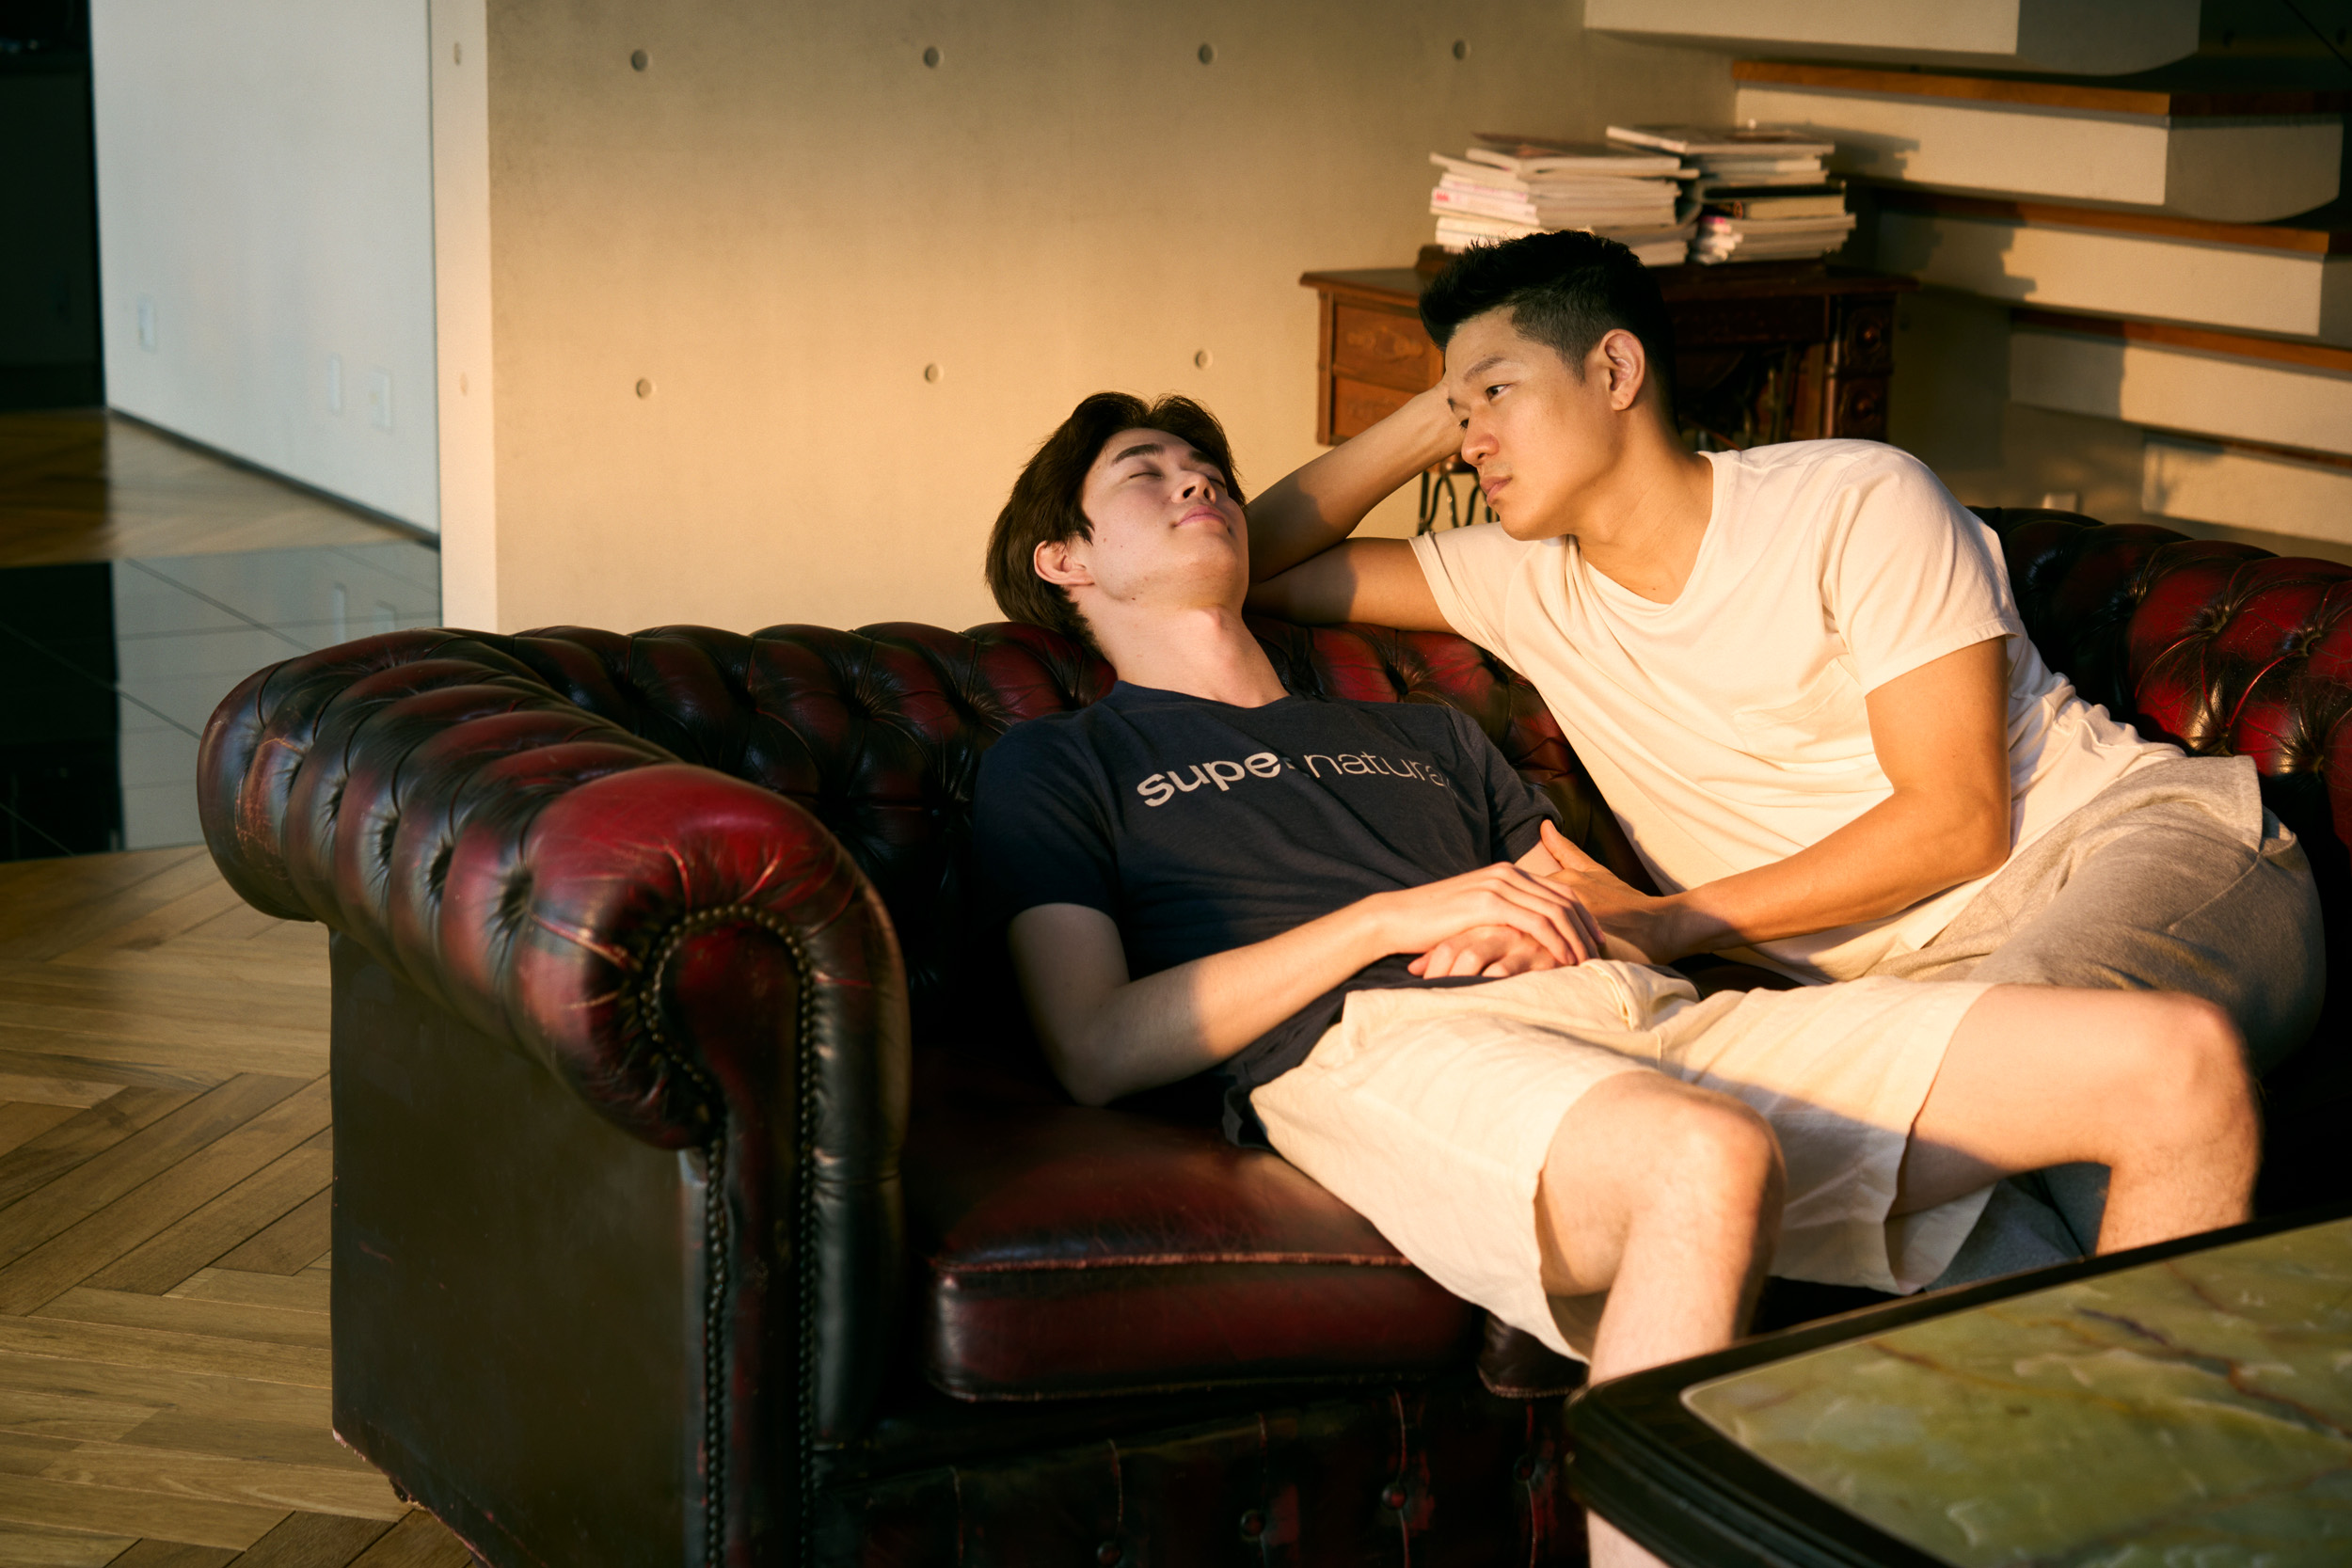 Two men sit on a sofa – one lays back with his eyes closed, the other rests his hand on his arm as he looks lovingly at him